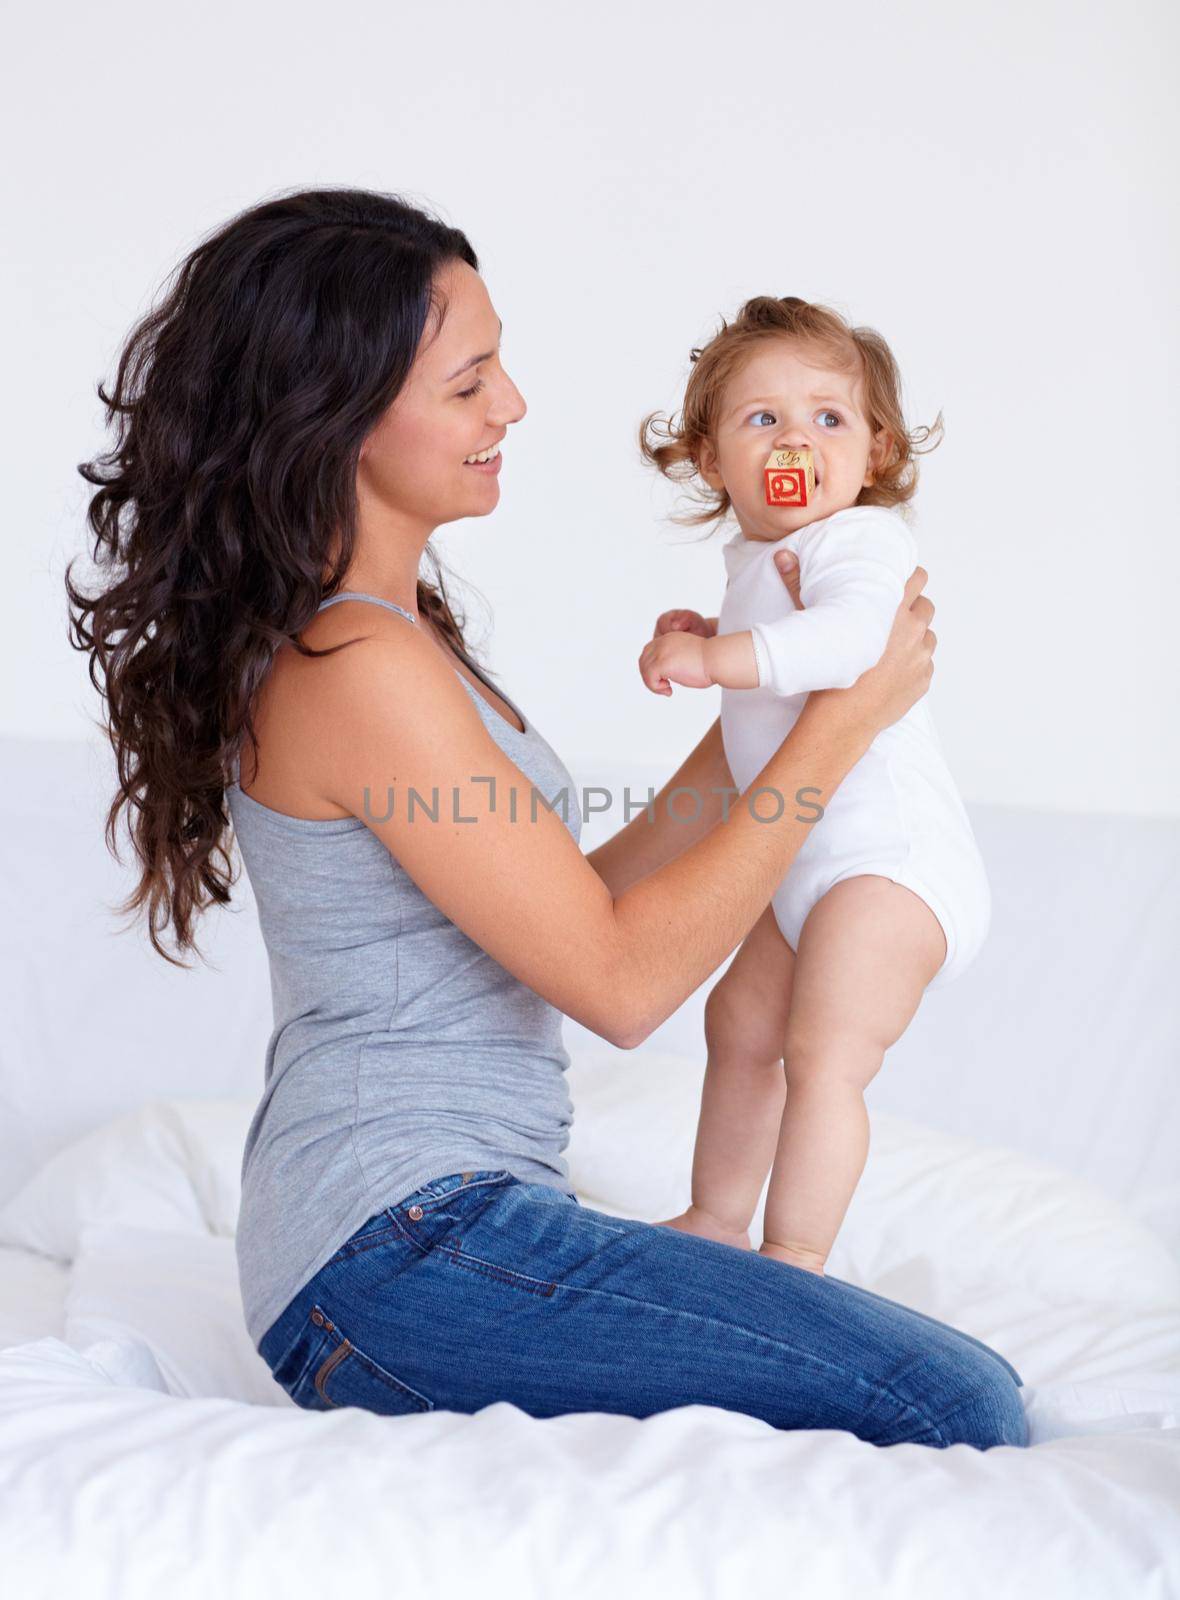 Relaxing at home with my little girl. Image of a mother sitting on her bed and holding up her baby daughter